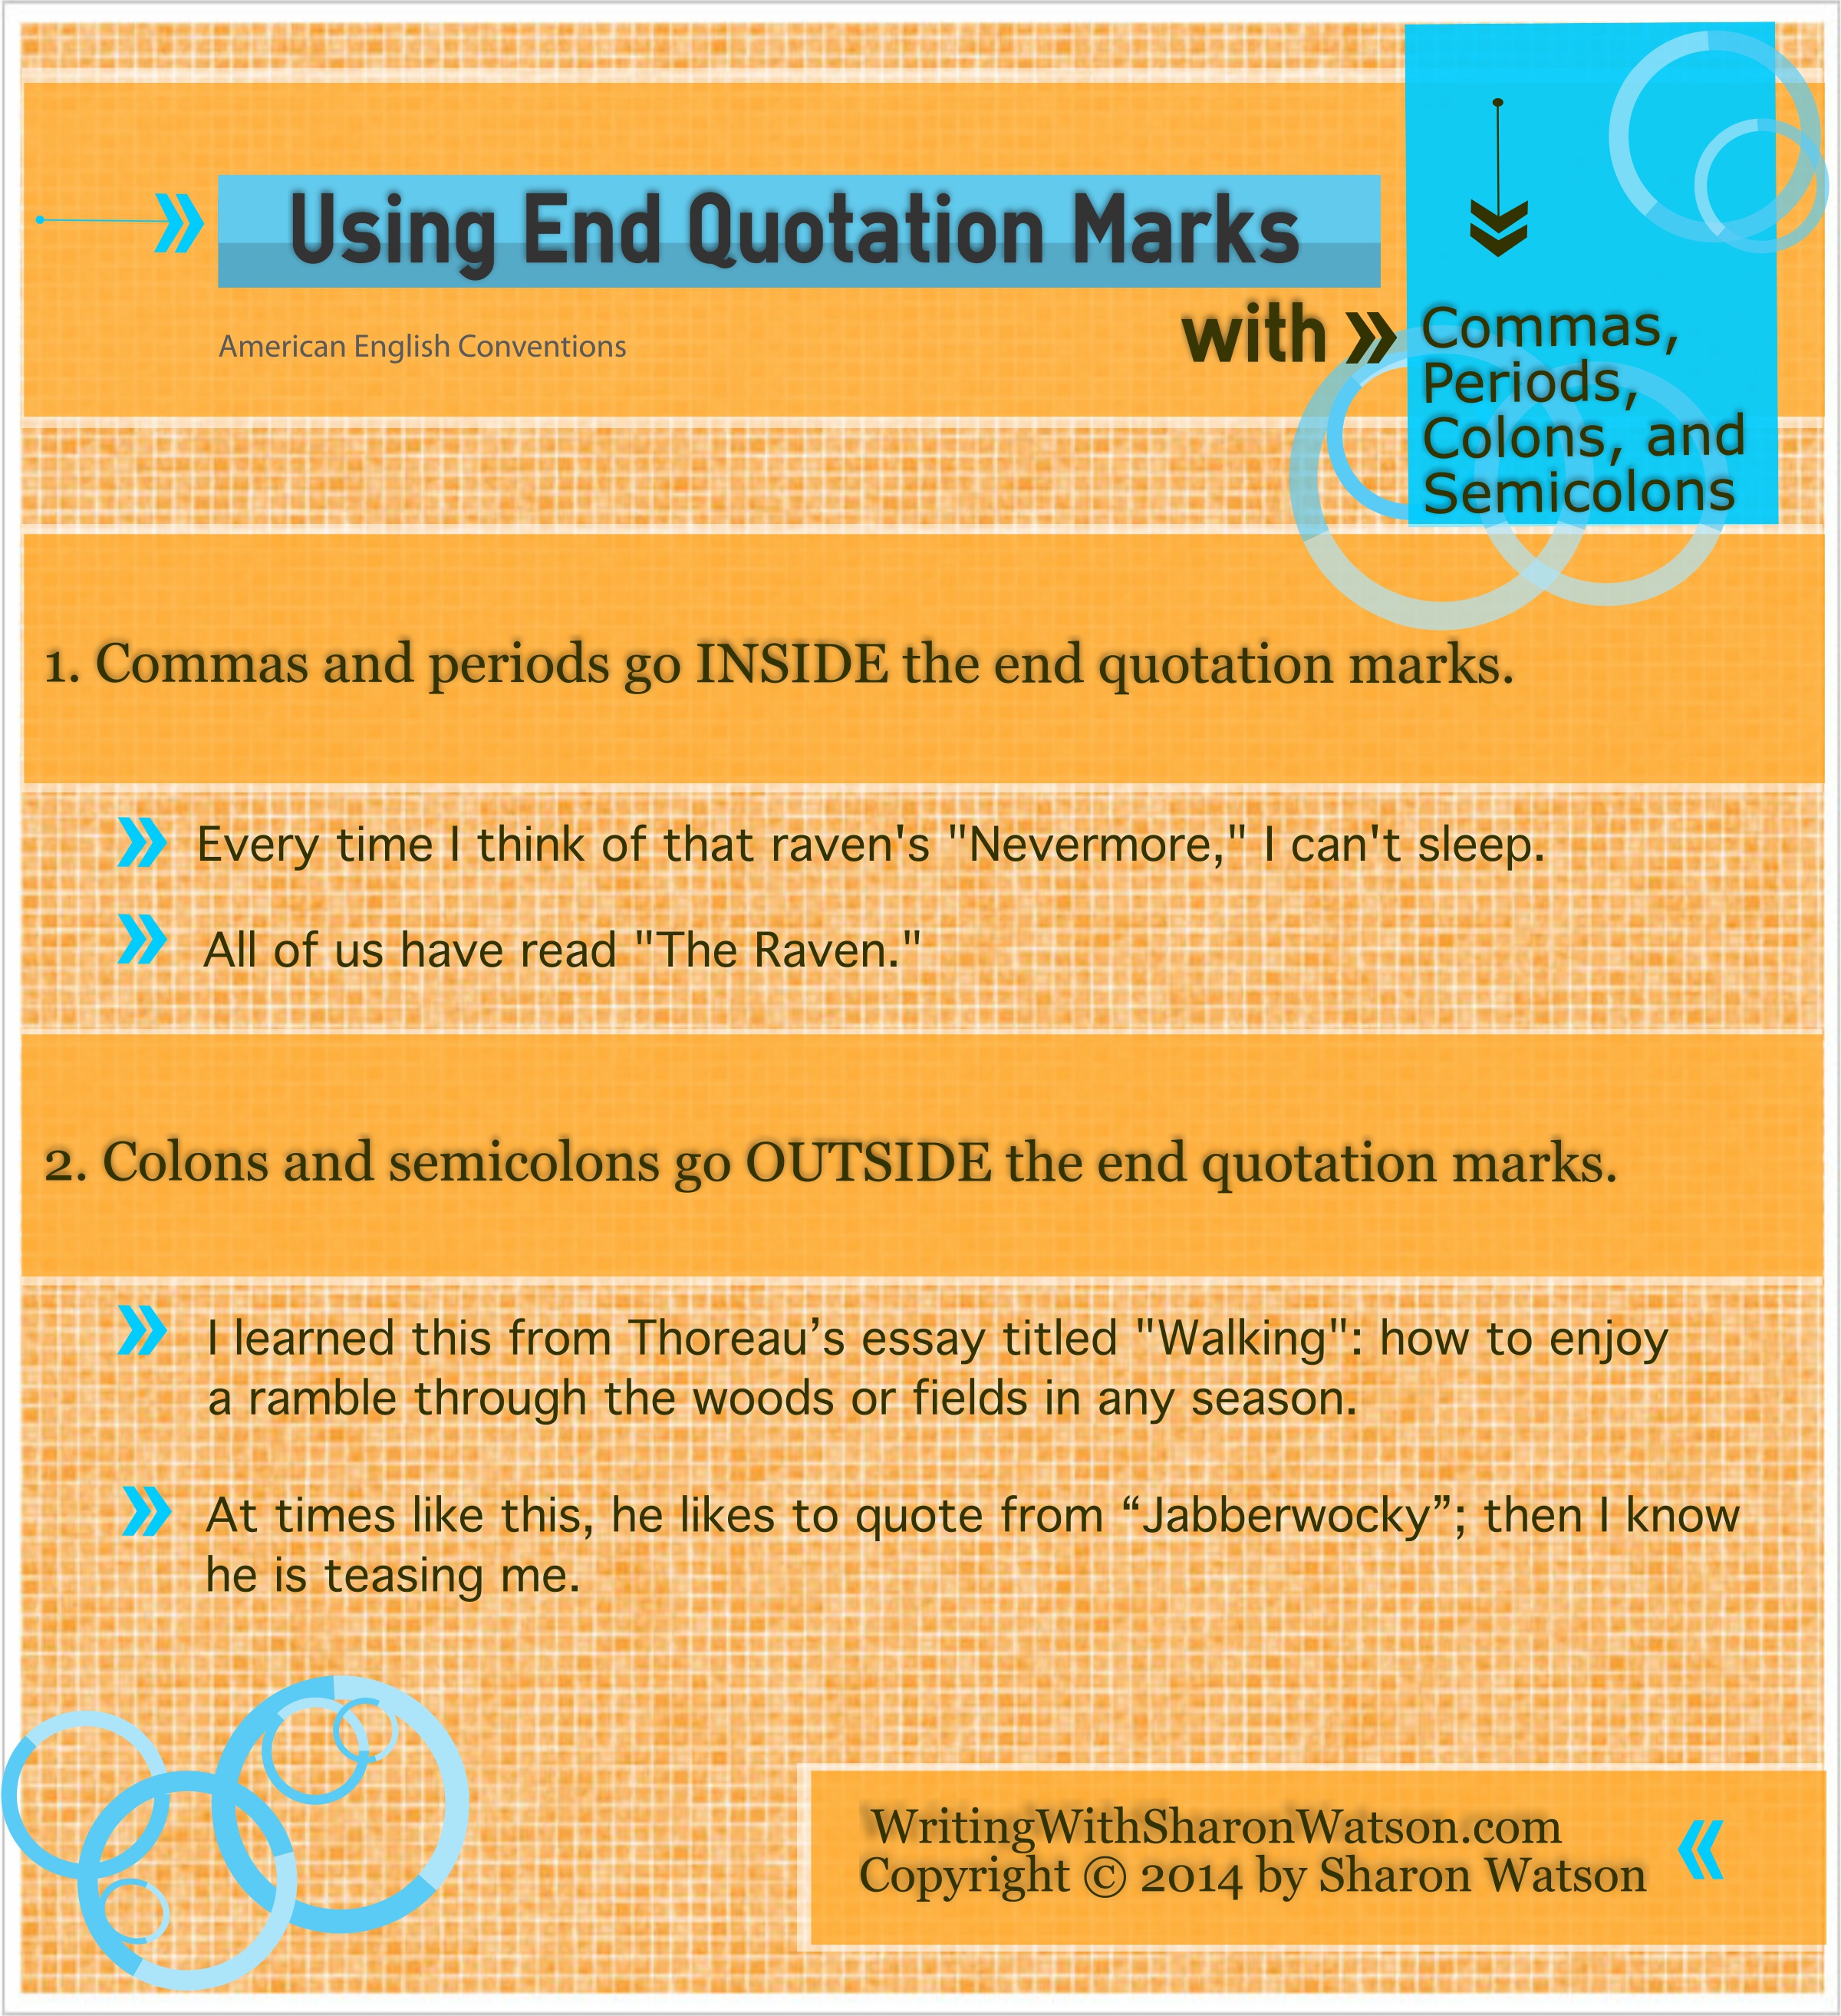 Quotation Marks and Commas, Periods, Colons, and Semicolons